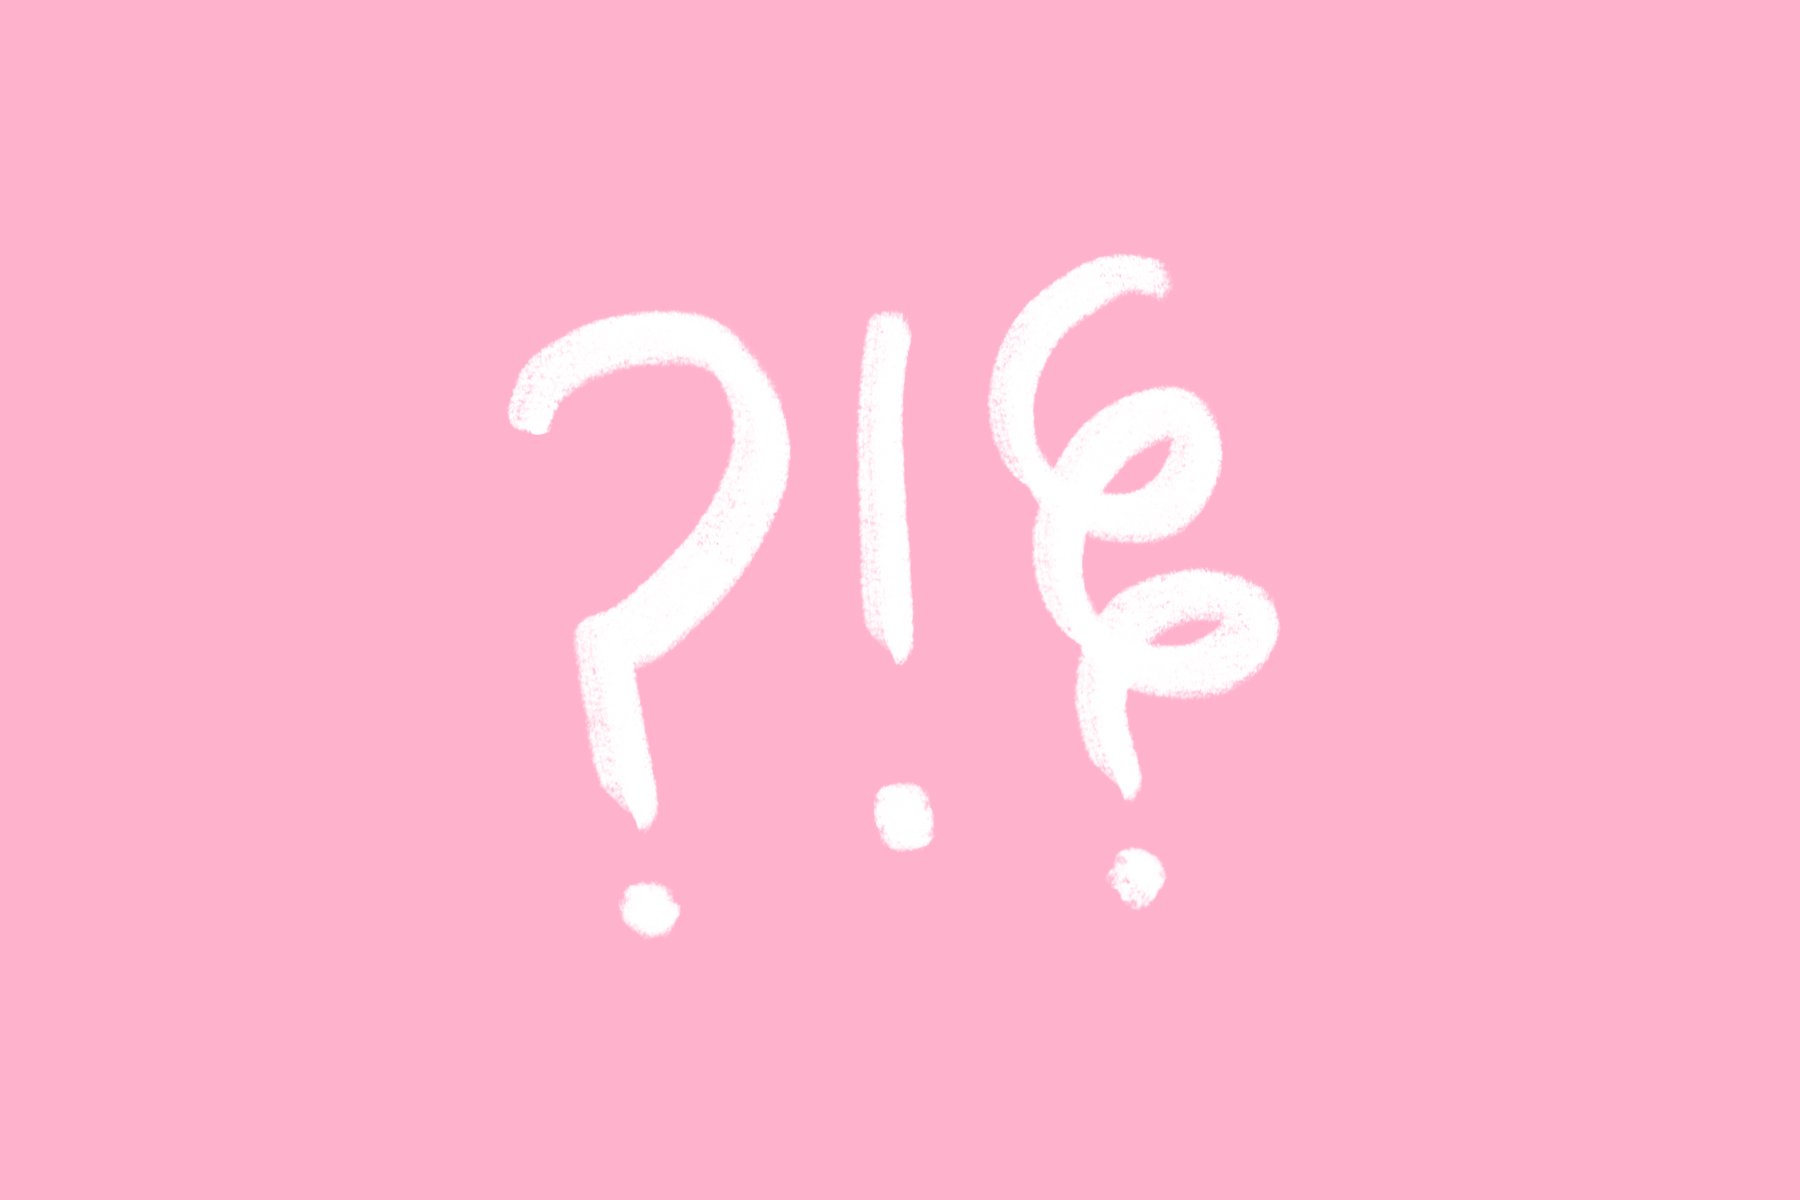 graphic image on a pink background, with a question mark, exclamation point and wiggly line drawn in a messy style